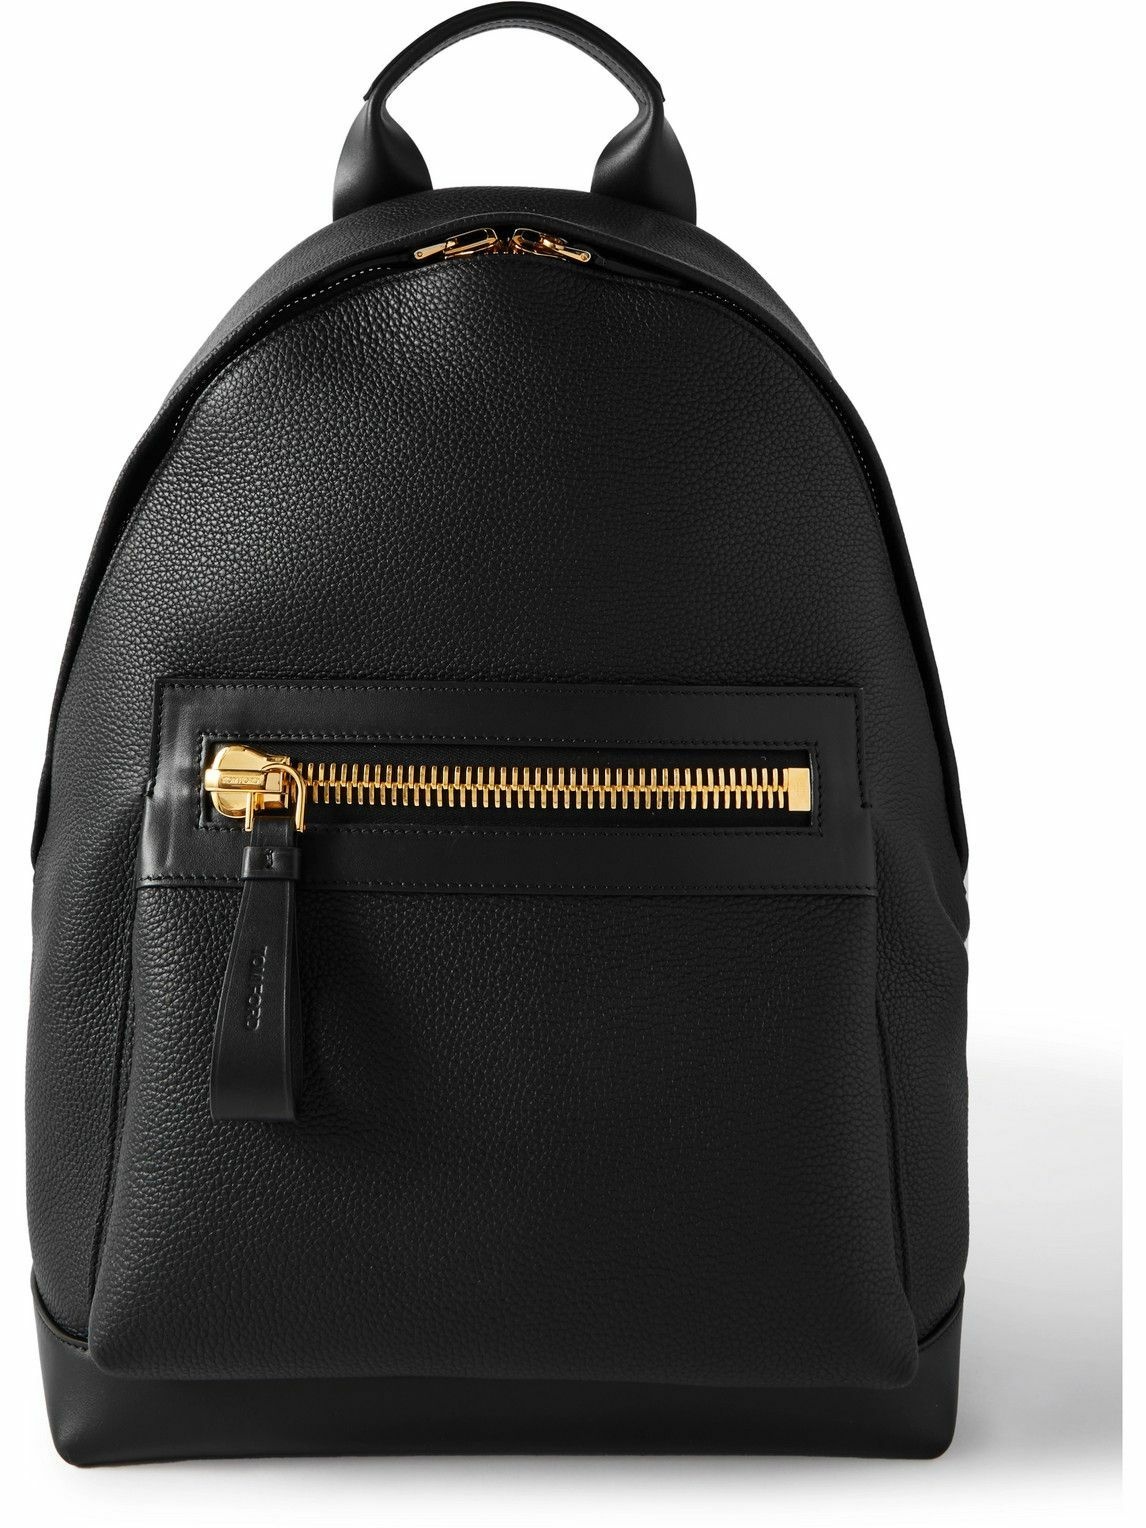 TOM FORD - Buckley Pebble-Grain Leather Backpack TOM FORD